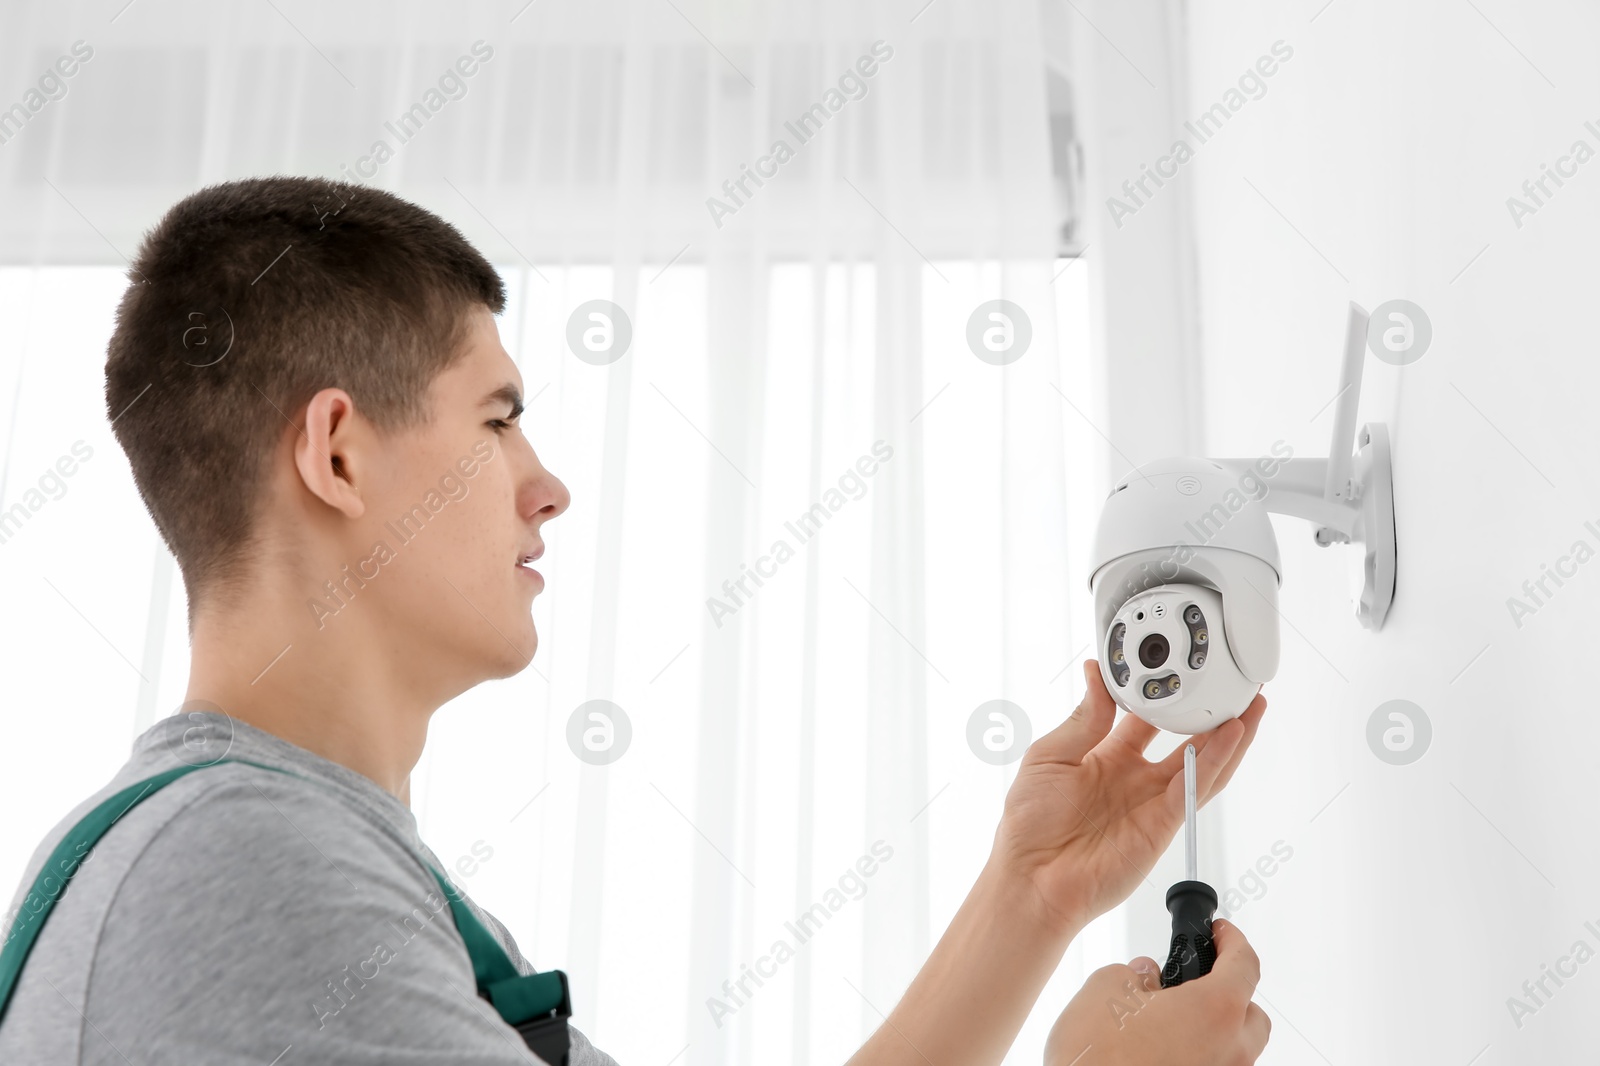 Photo of Technician with screwdriver installing CCTV camera on wall indoors